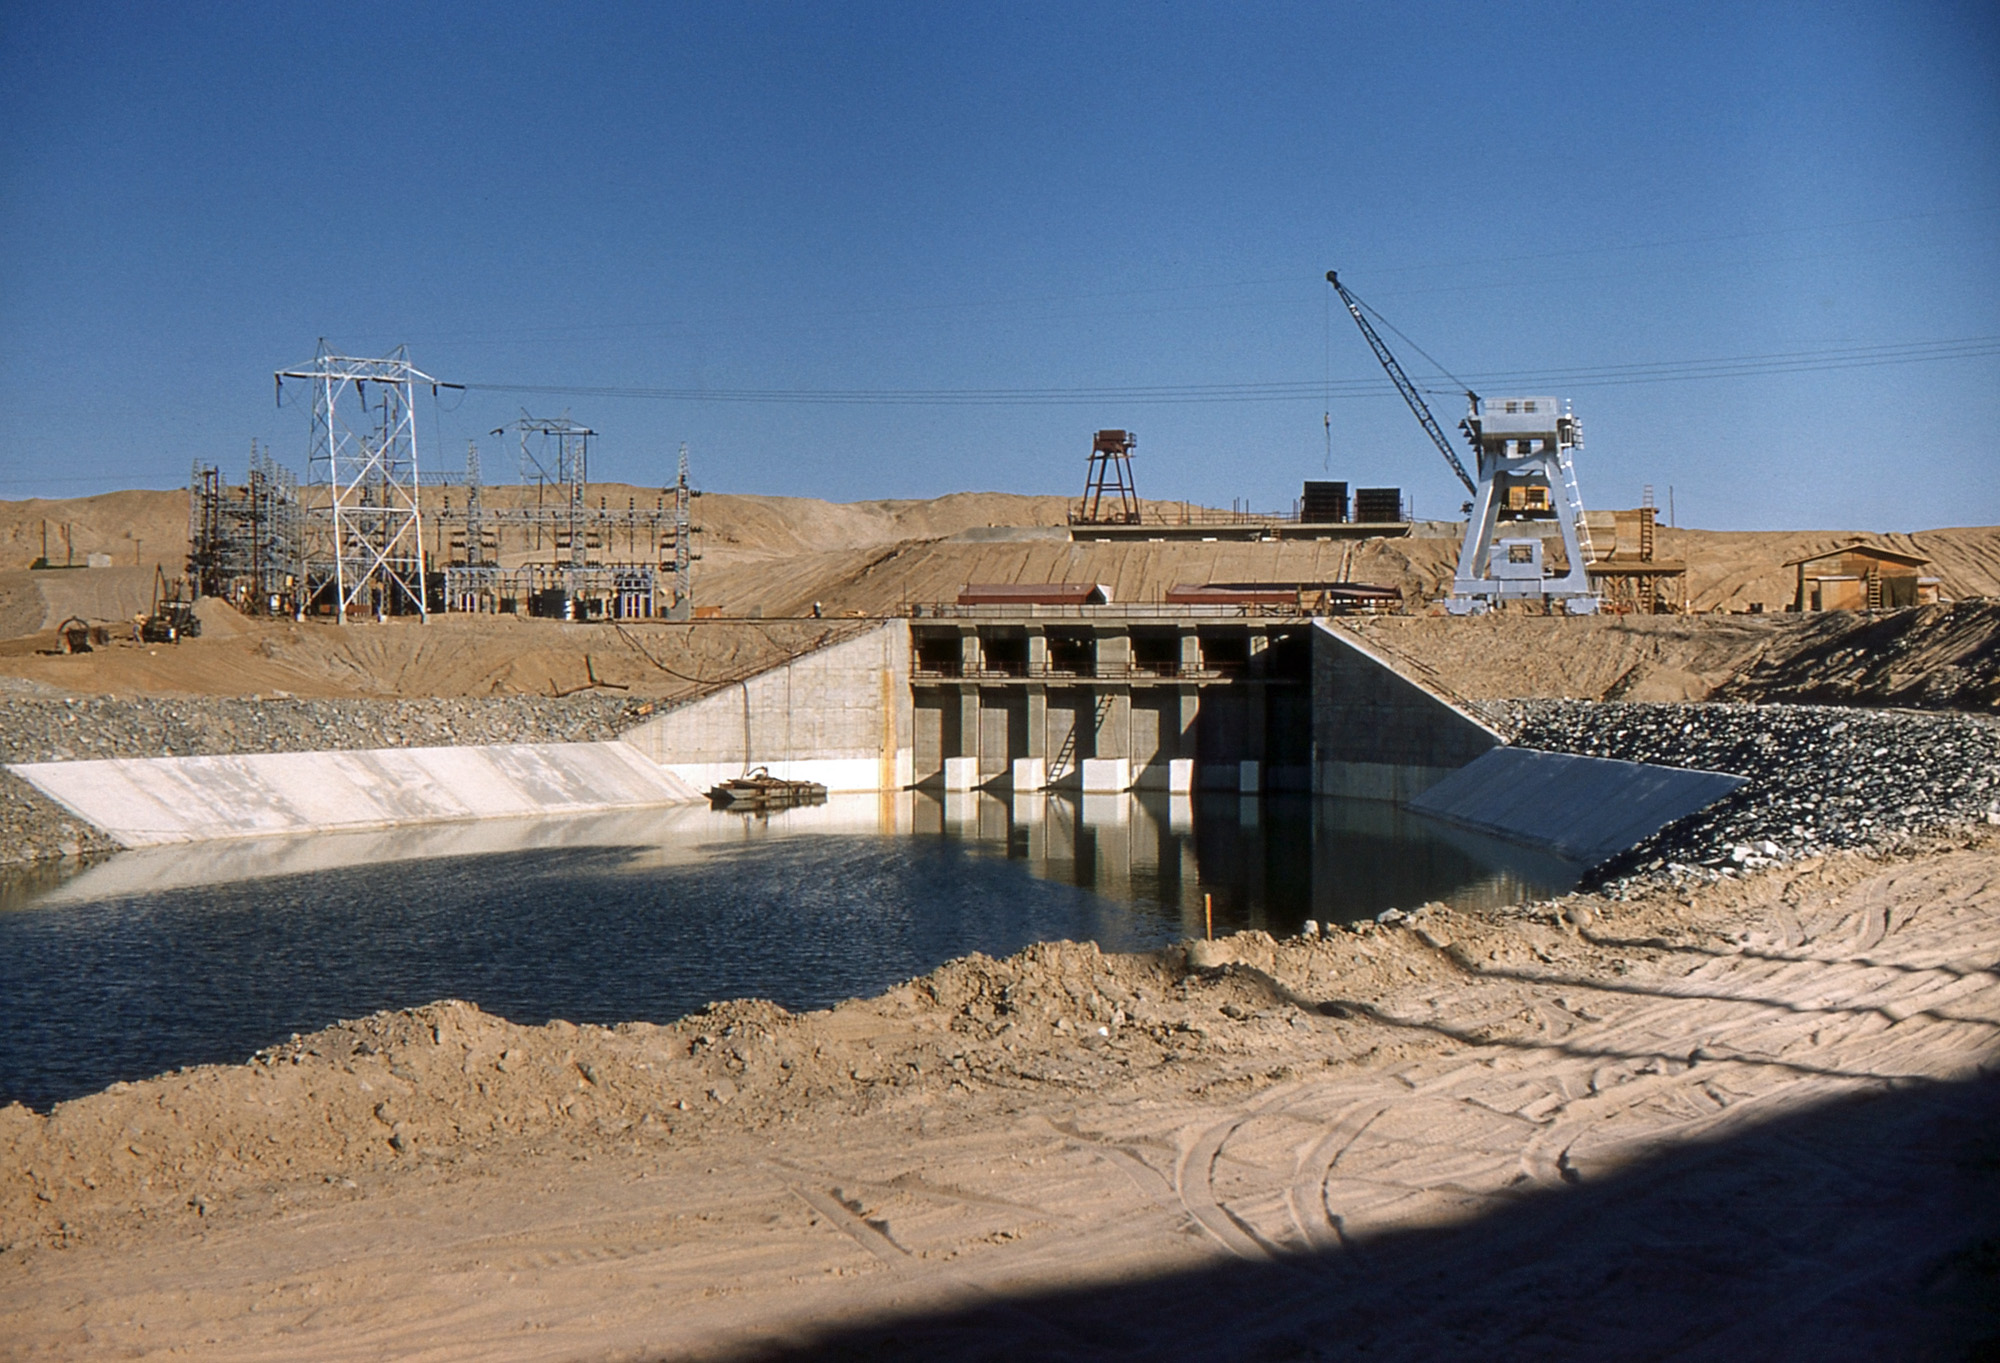 The reason for my father's trip was to visit this hydroelectric project, which must be in the general vicinity of Sacramento, California. View full size.